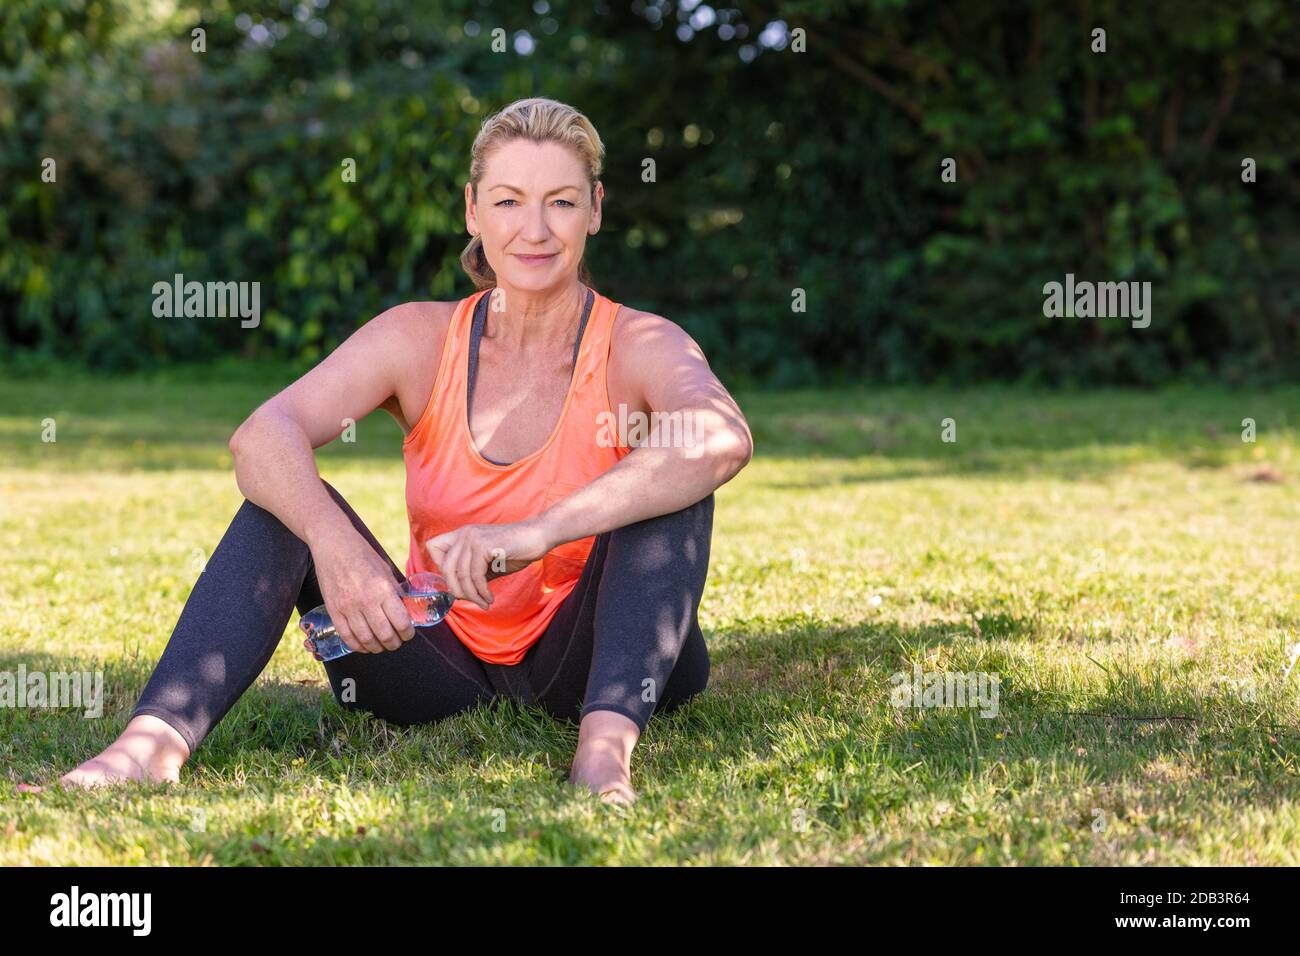 Outdoor portrait of an attractive middle aged blonde woman smiling drinking water relaxing after yoga, exercising, running or fitness lifestyle Stock Photo